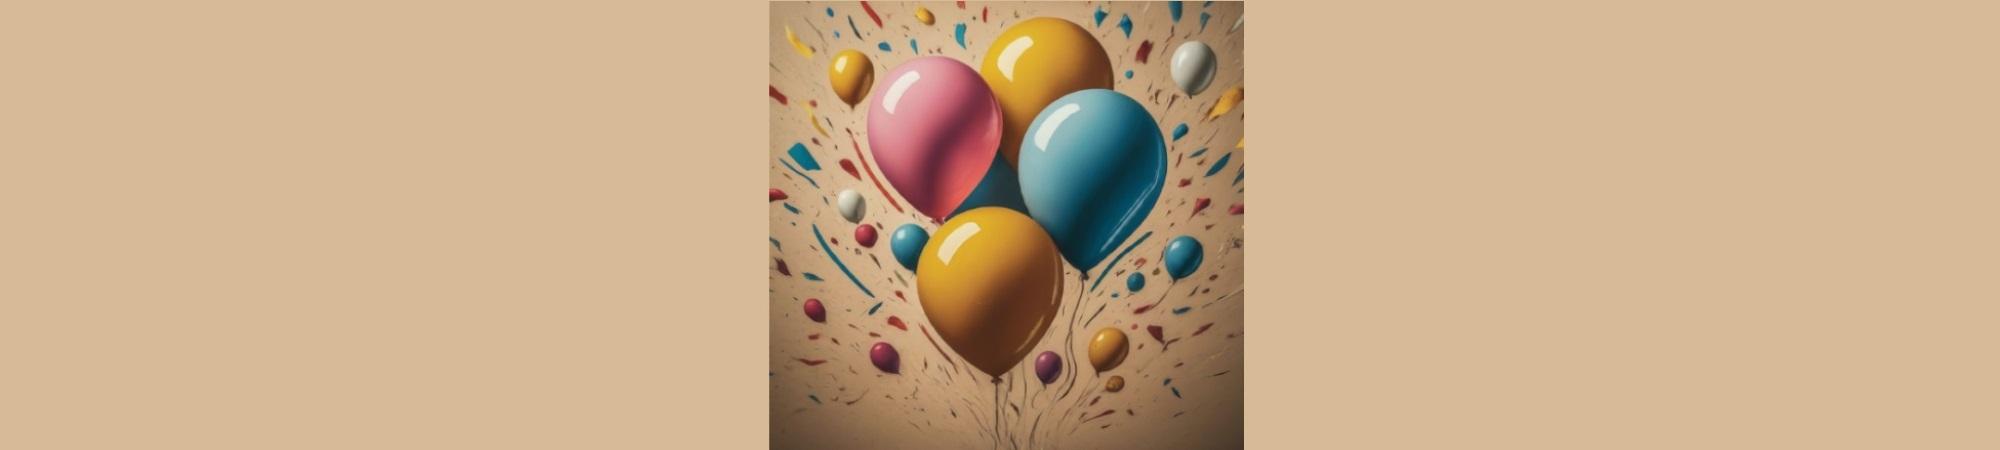 Pastel-colored shiny ballons of cheerfulness. Old rose background. 